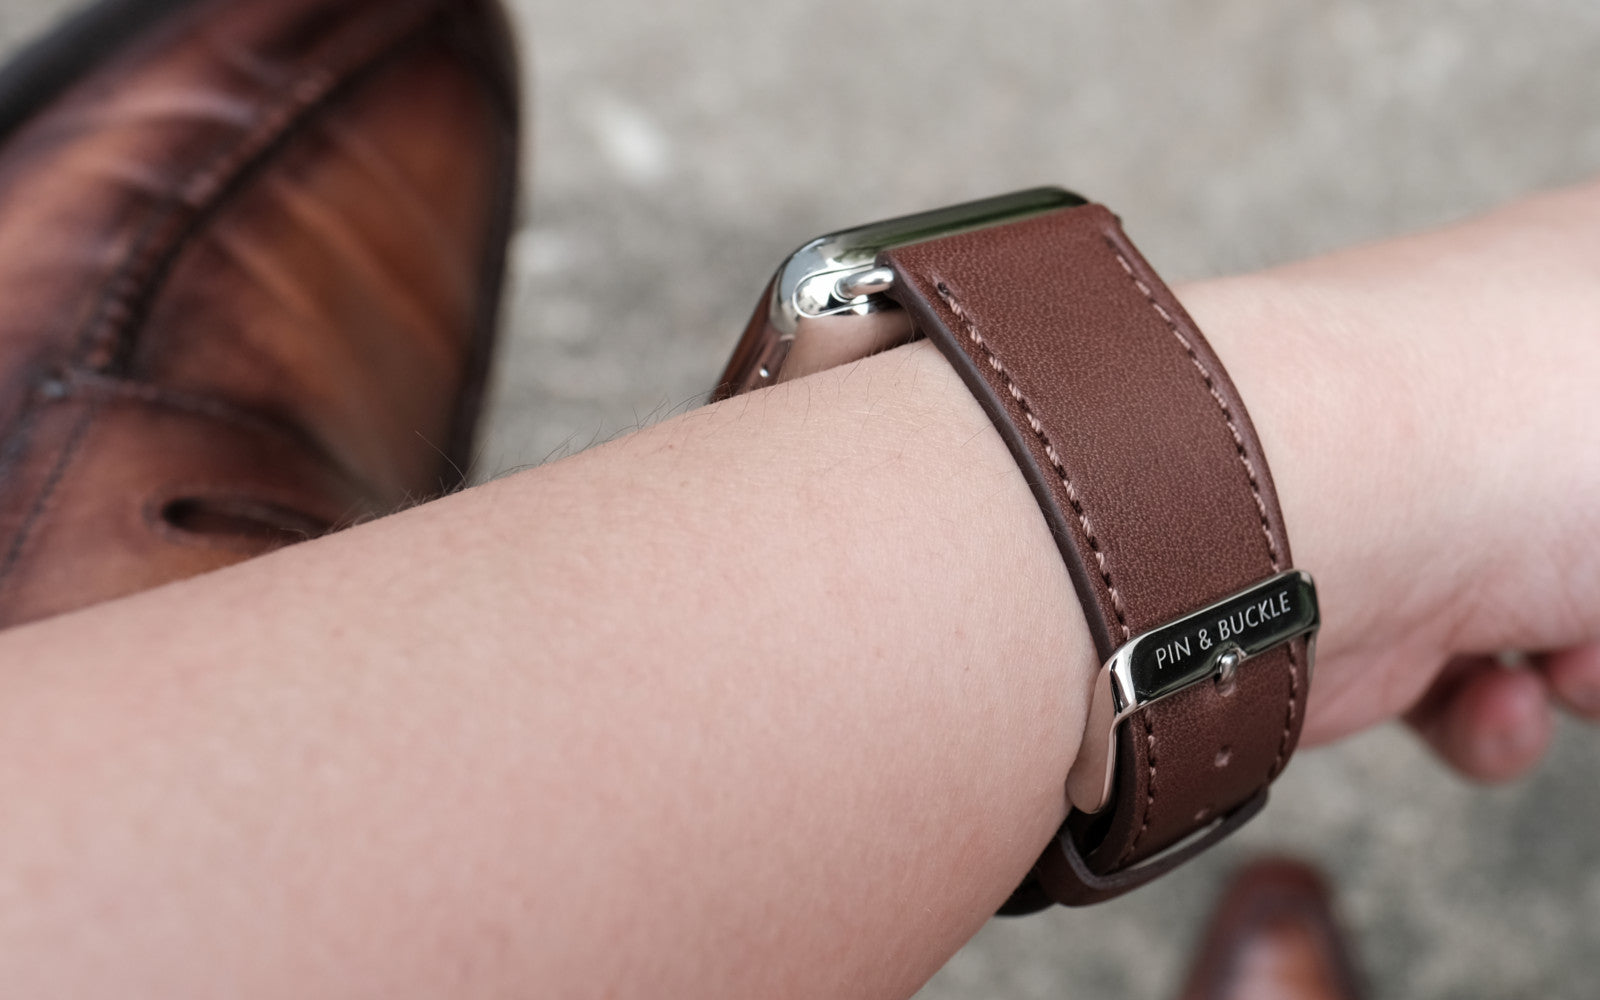 Pin and Buckle Apple Watch Straps - Reviews Banner 3